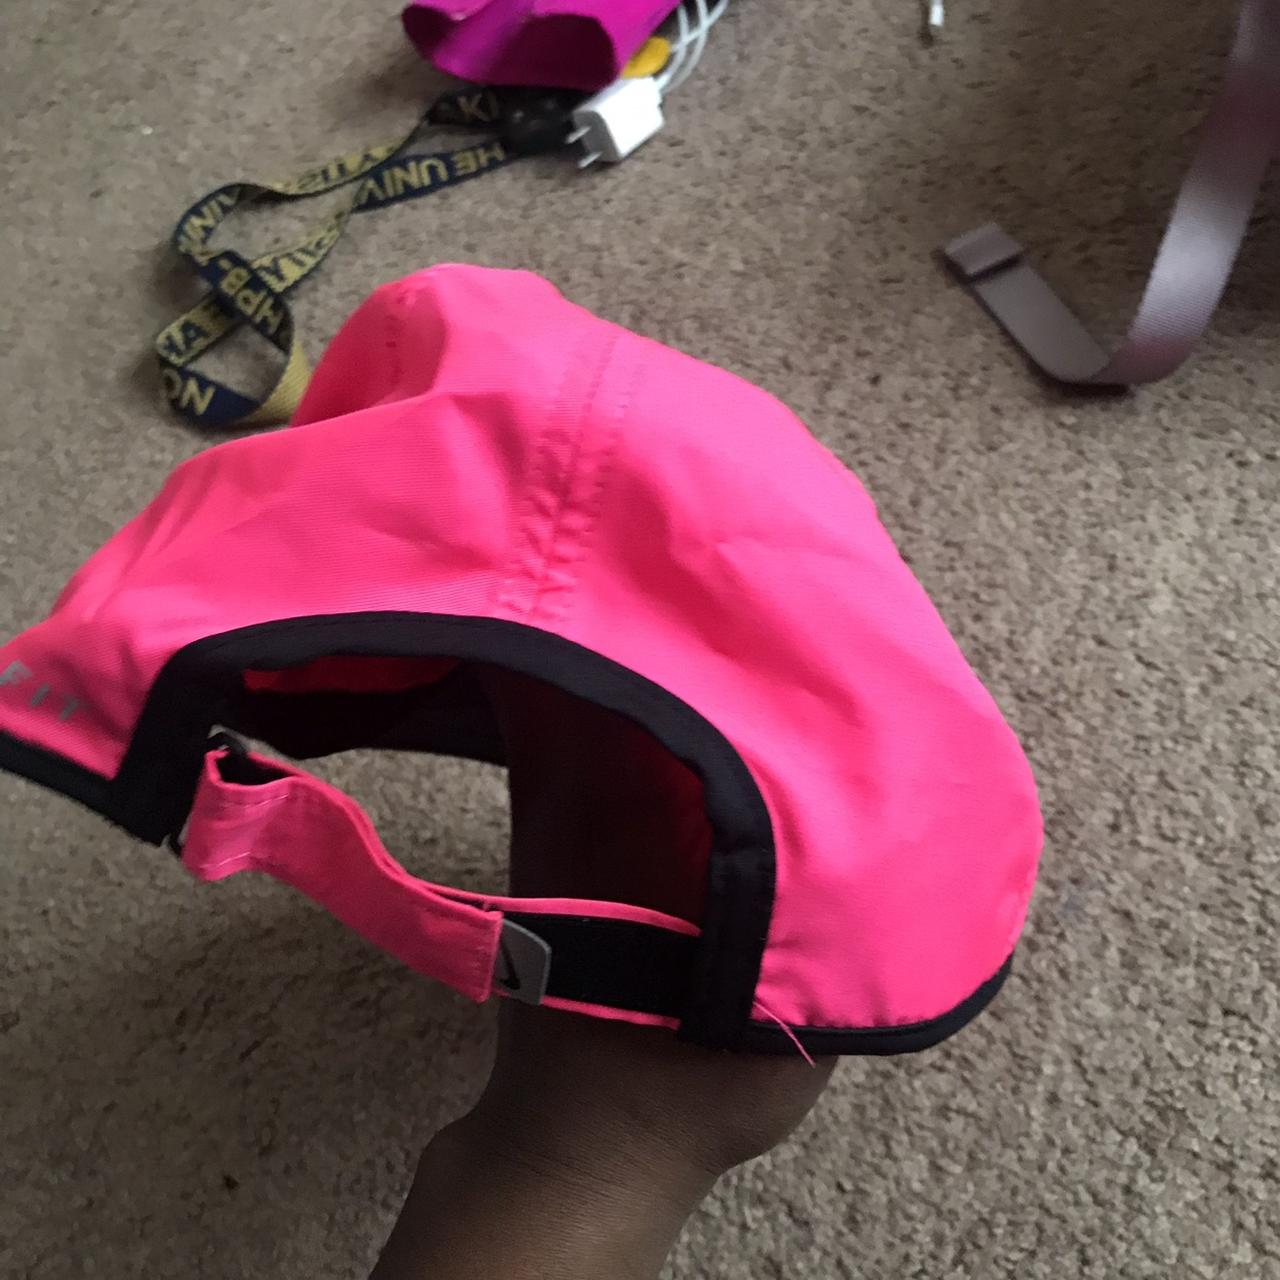 Hot pink Nike Dri fit hat In good condition #nike - Depop